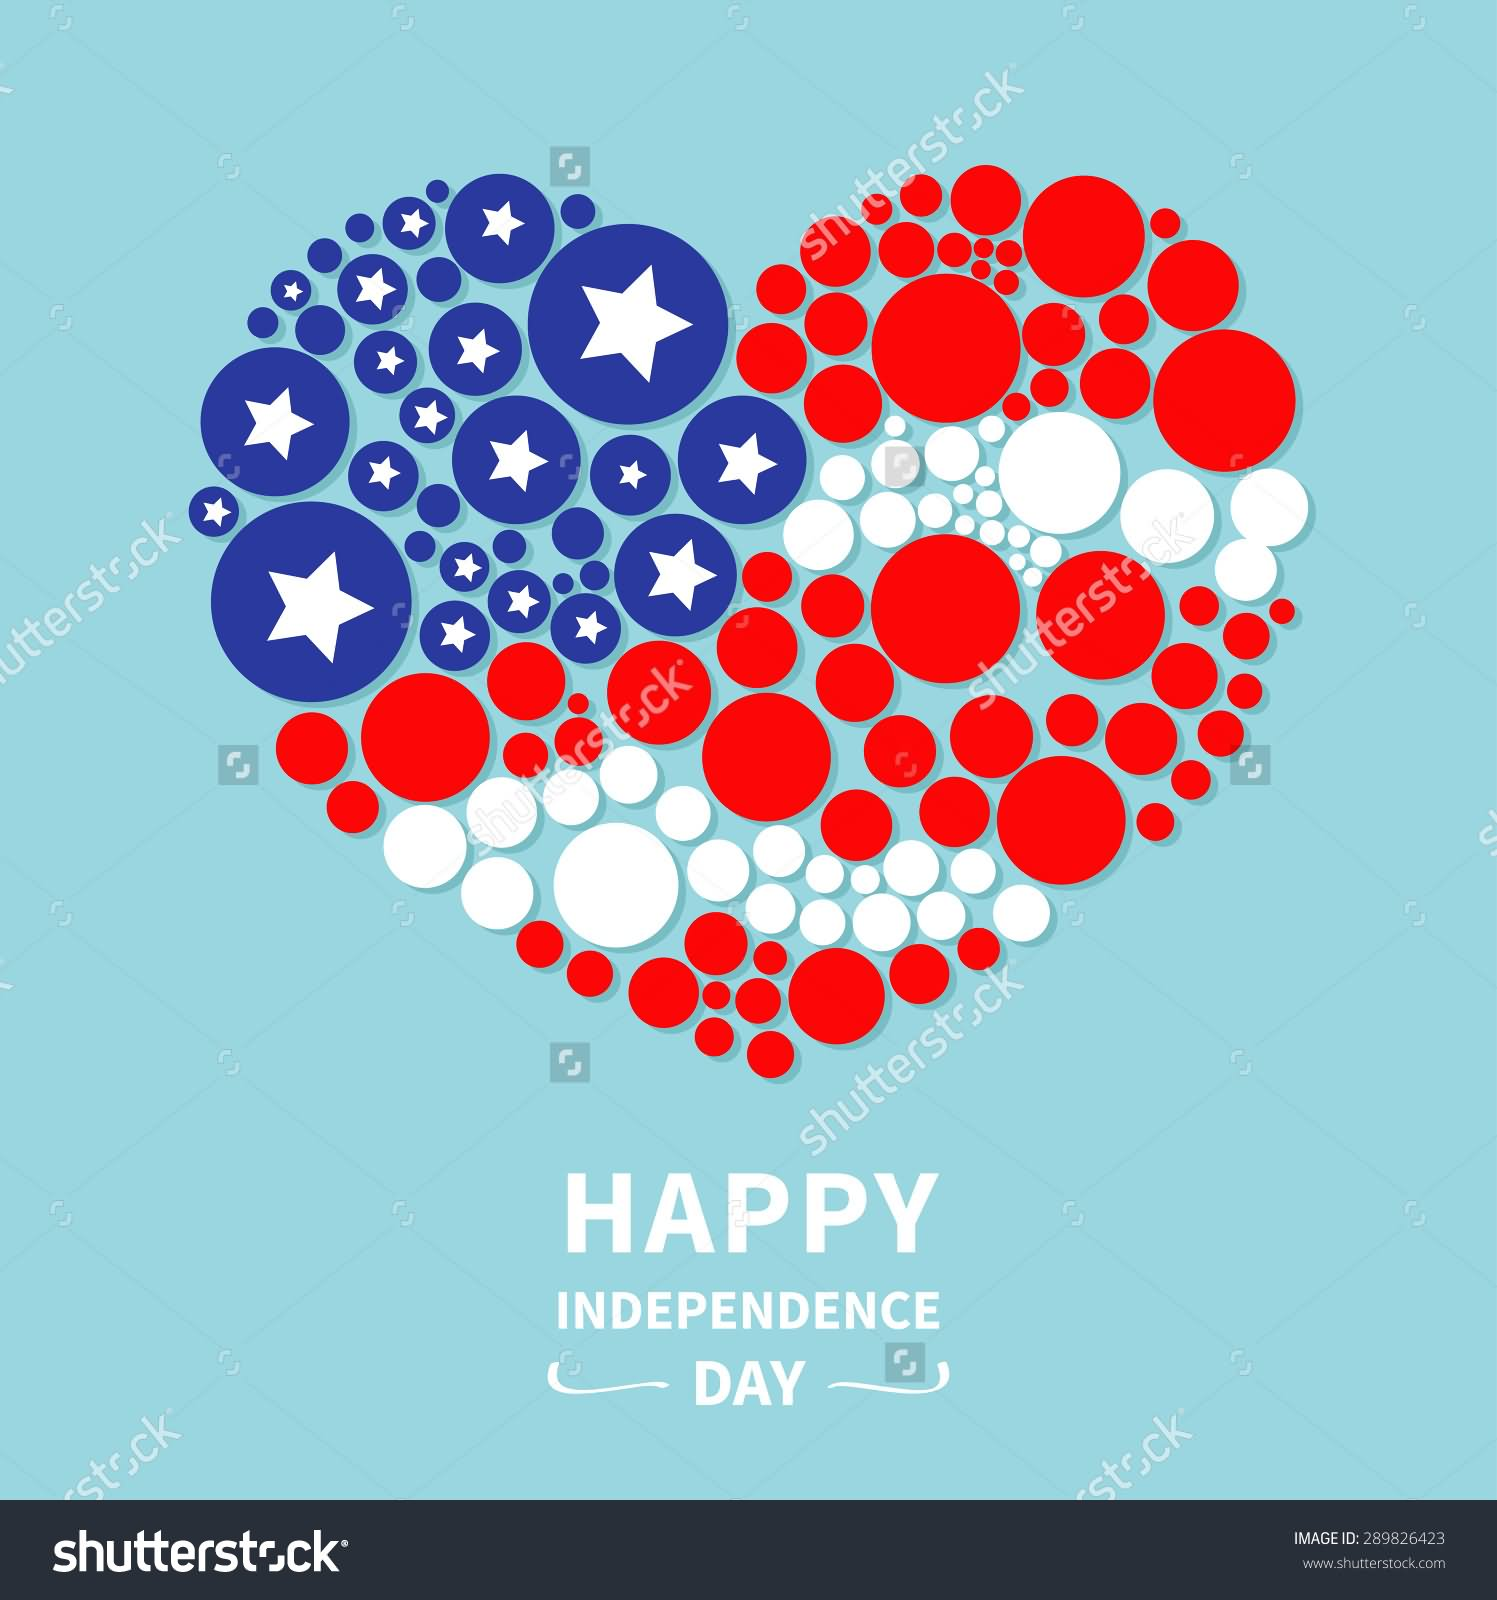 Happy 4th July Independence Day Usa Image